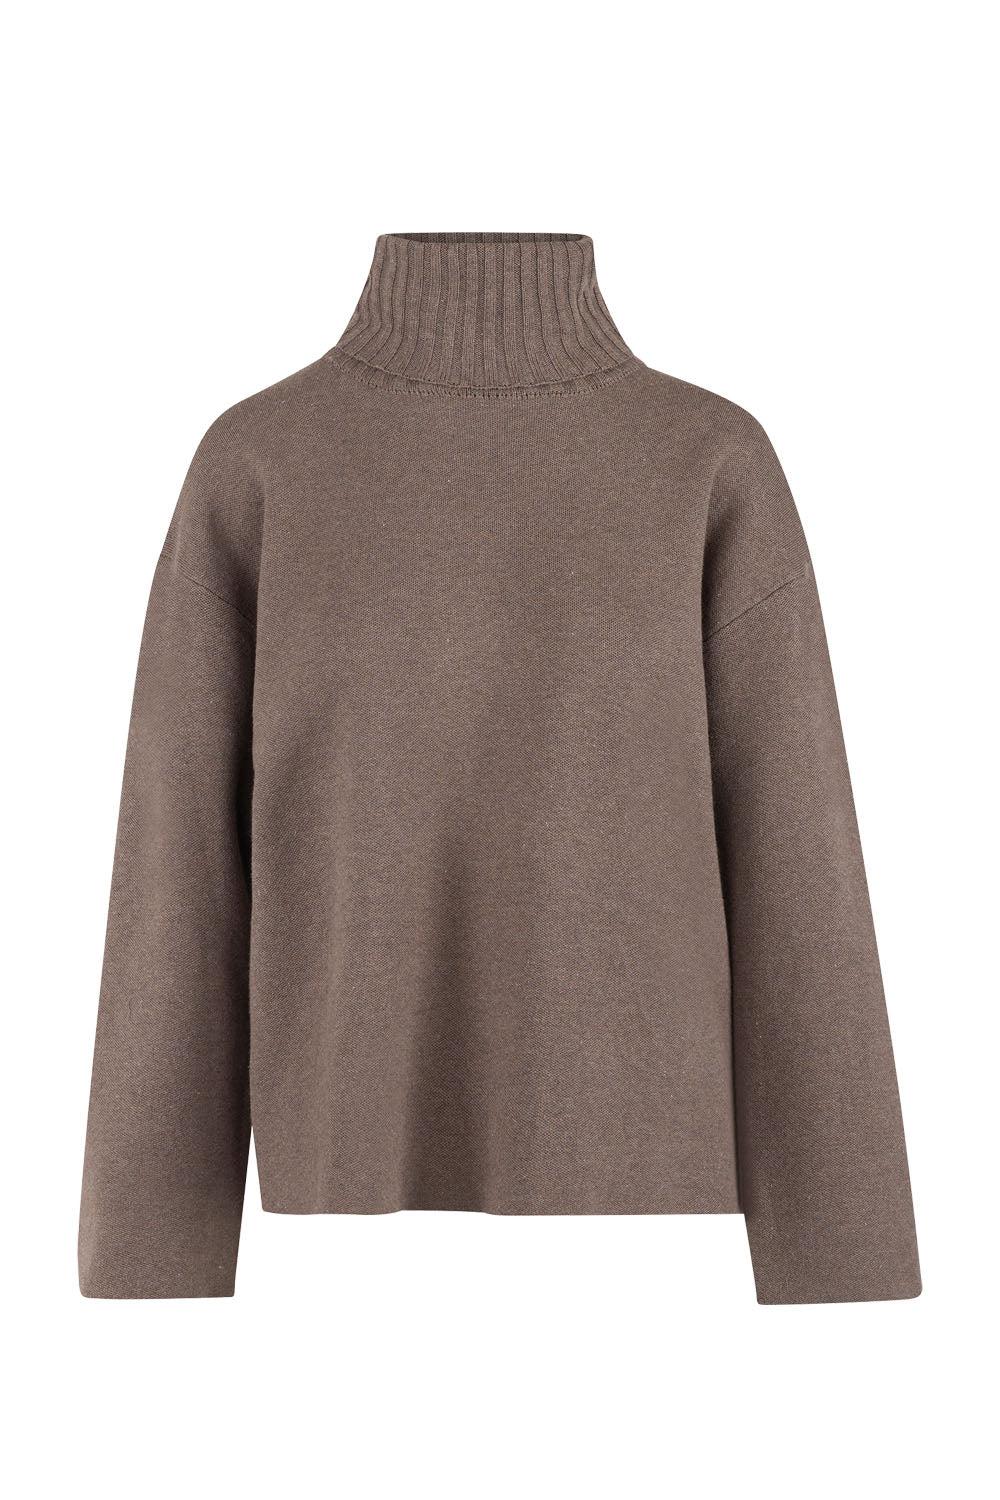 Elly Sweater Brown